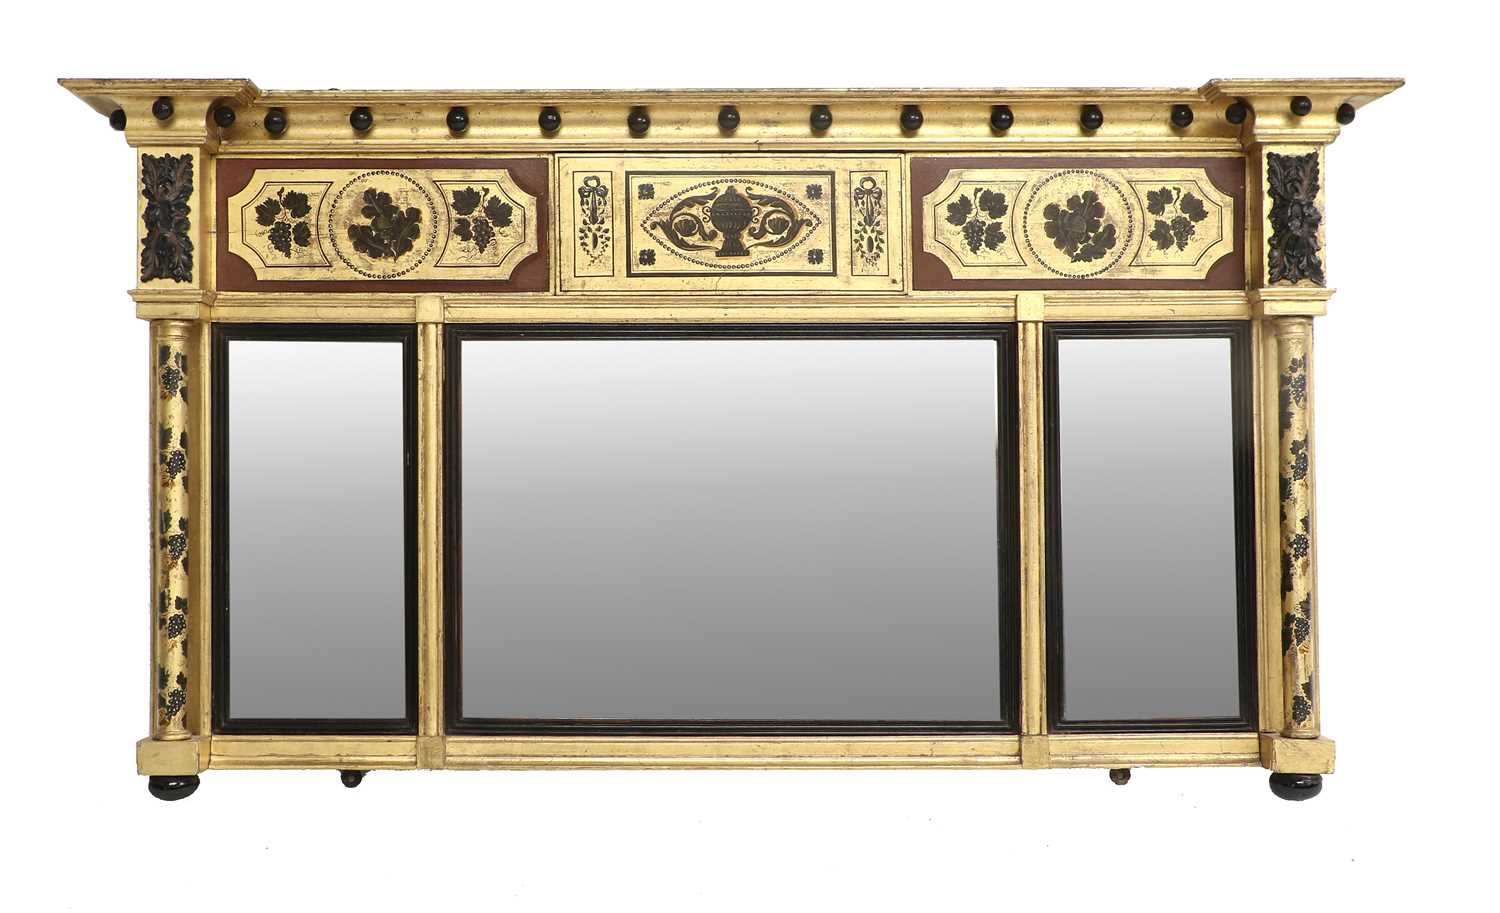 A Regency Gilt and Part-Ebonised Overmantel Mirror, early 19th century, of breakfront form with bold